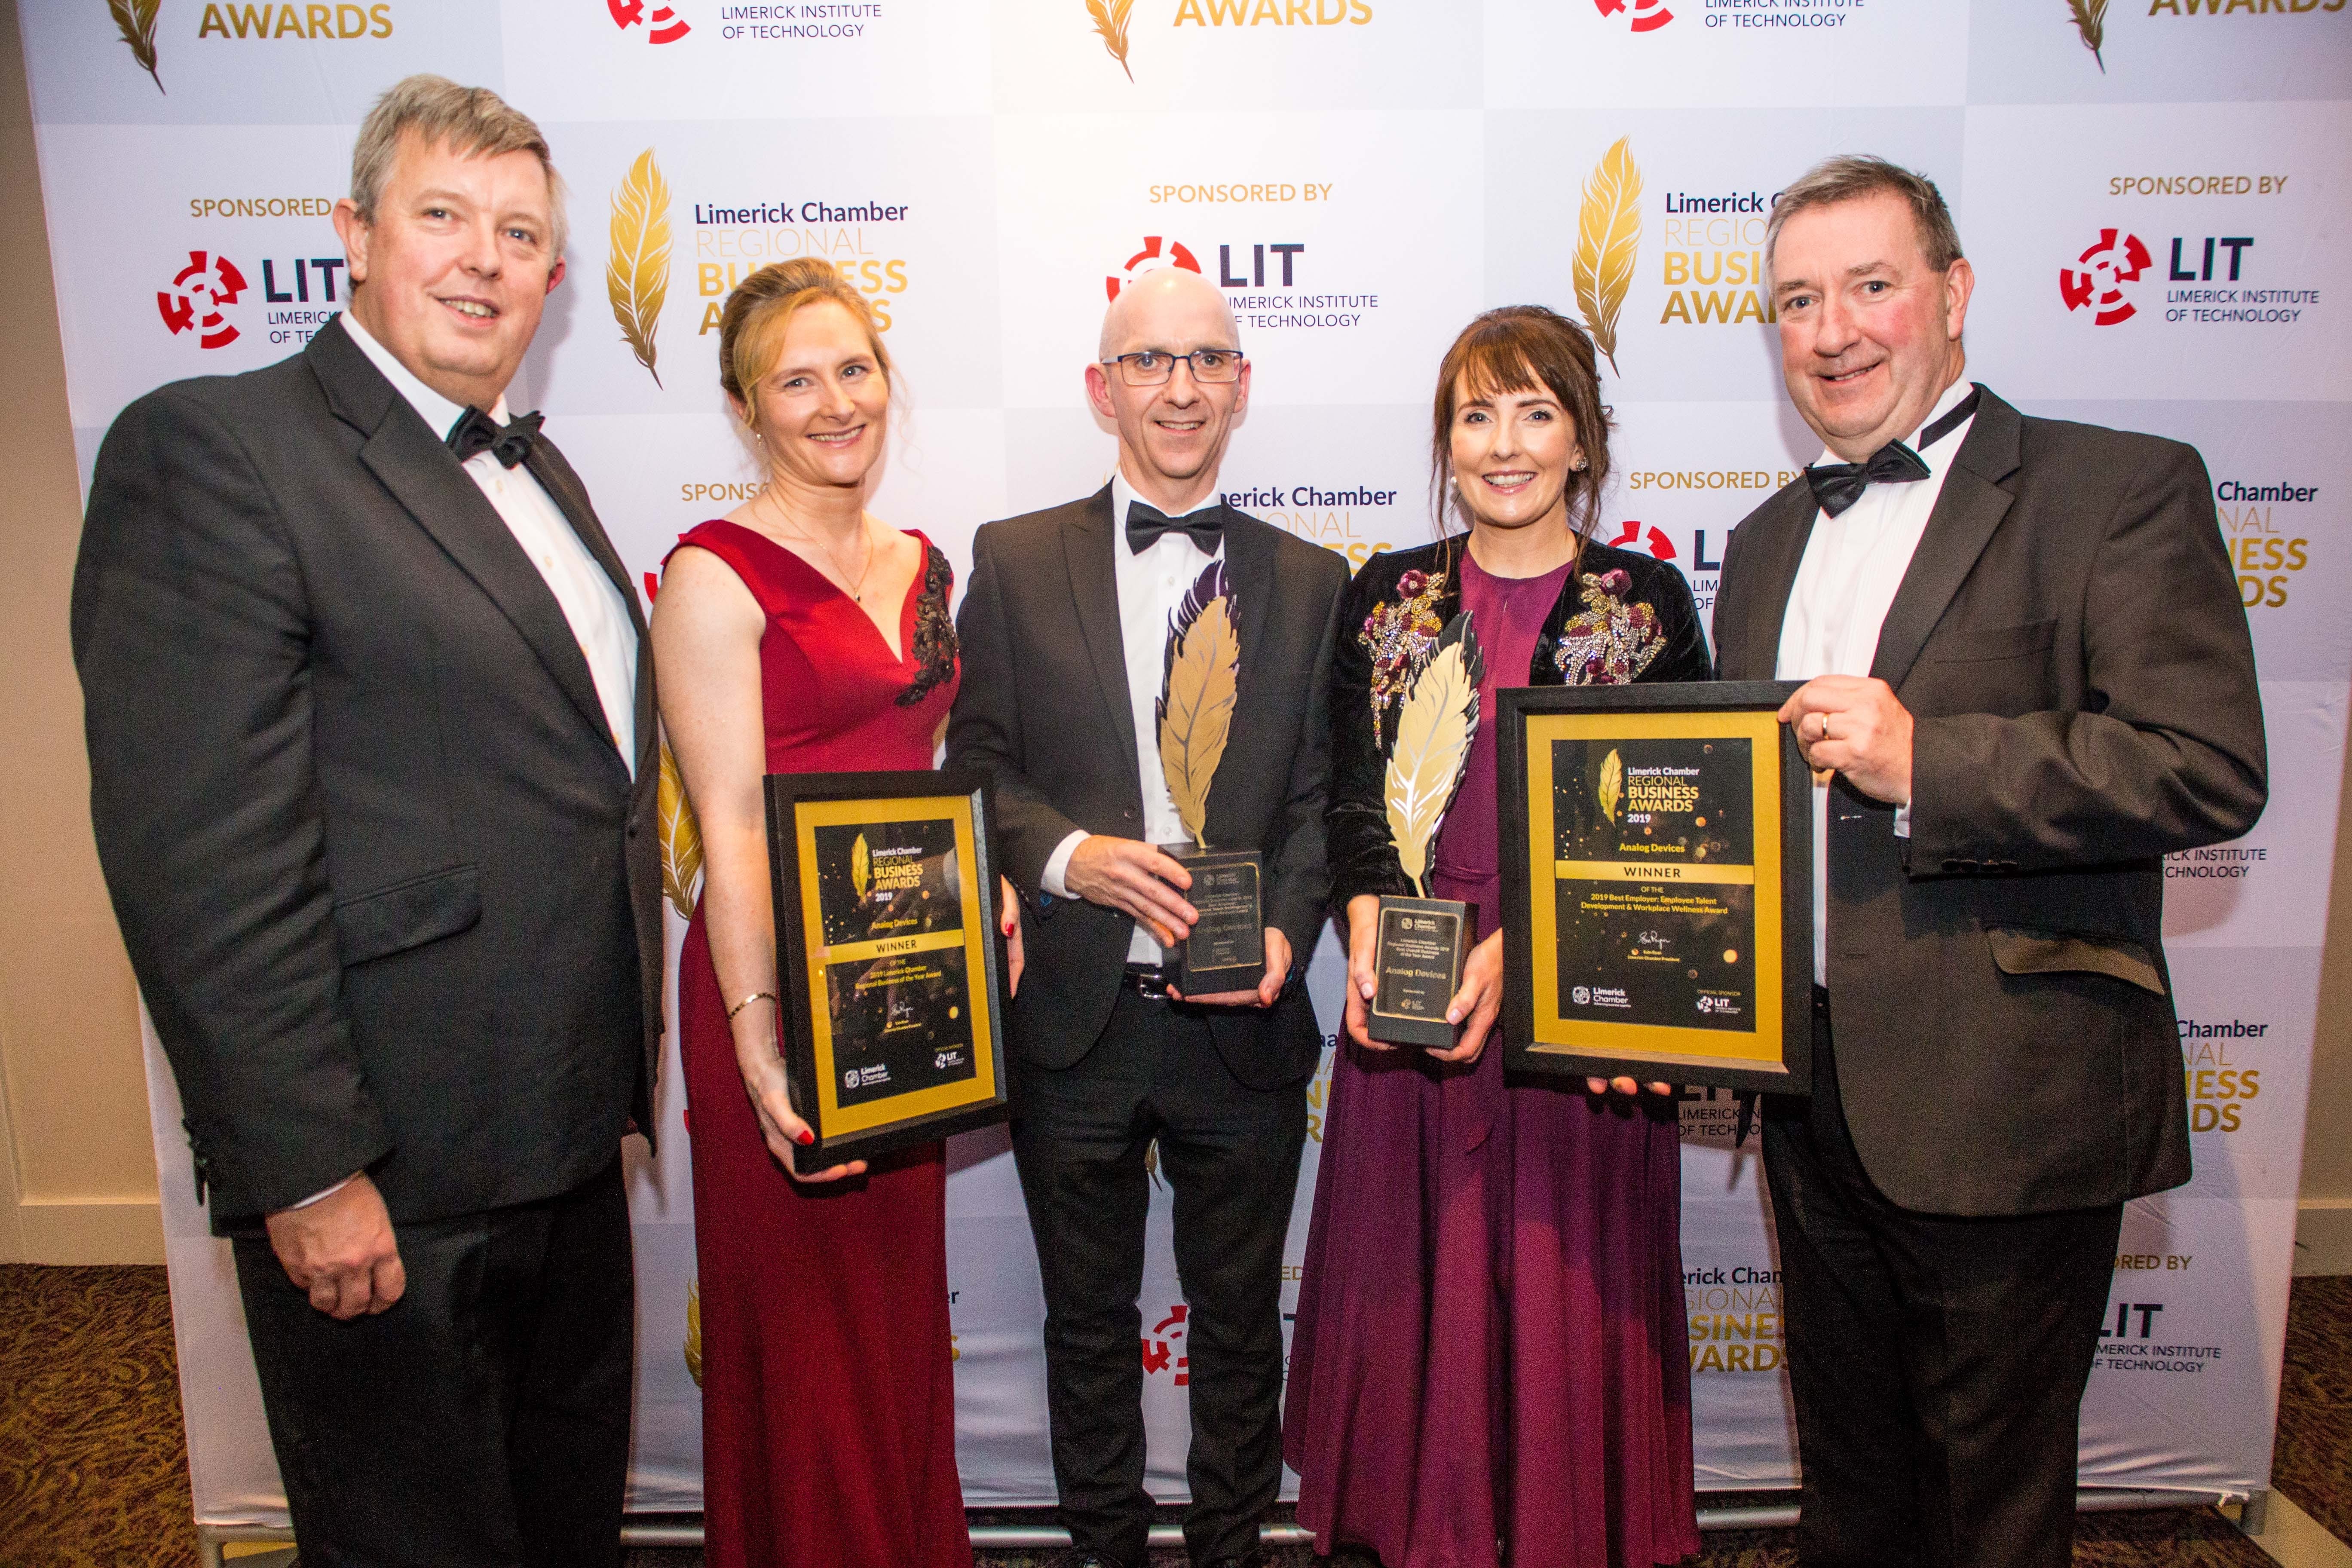 Leo McHugh, Fiona Treacy, Mike Morissey, Fiona Keogh, and Denis Doyle of Analog Dives pictured with their awards for  "Best Employer" and "Limerick Chamber Regional Business of the Year" at the Limerick Chamber President's Dinner. Photo: Cian Reinhardt